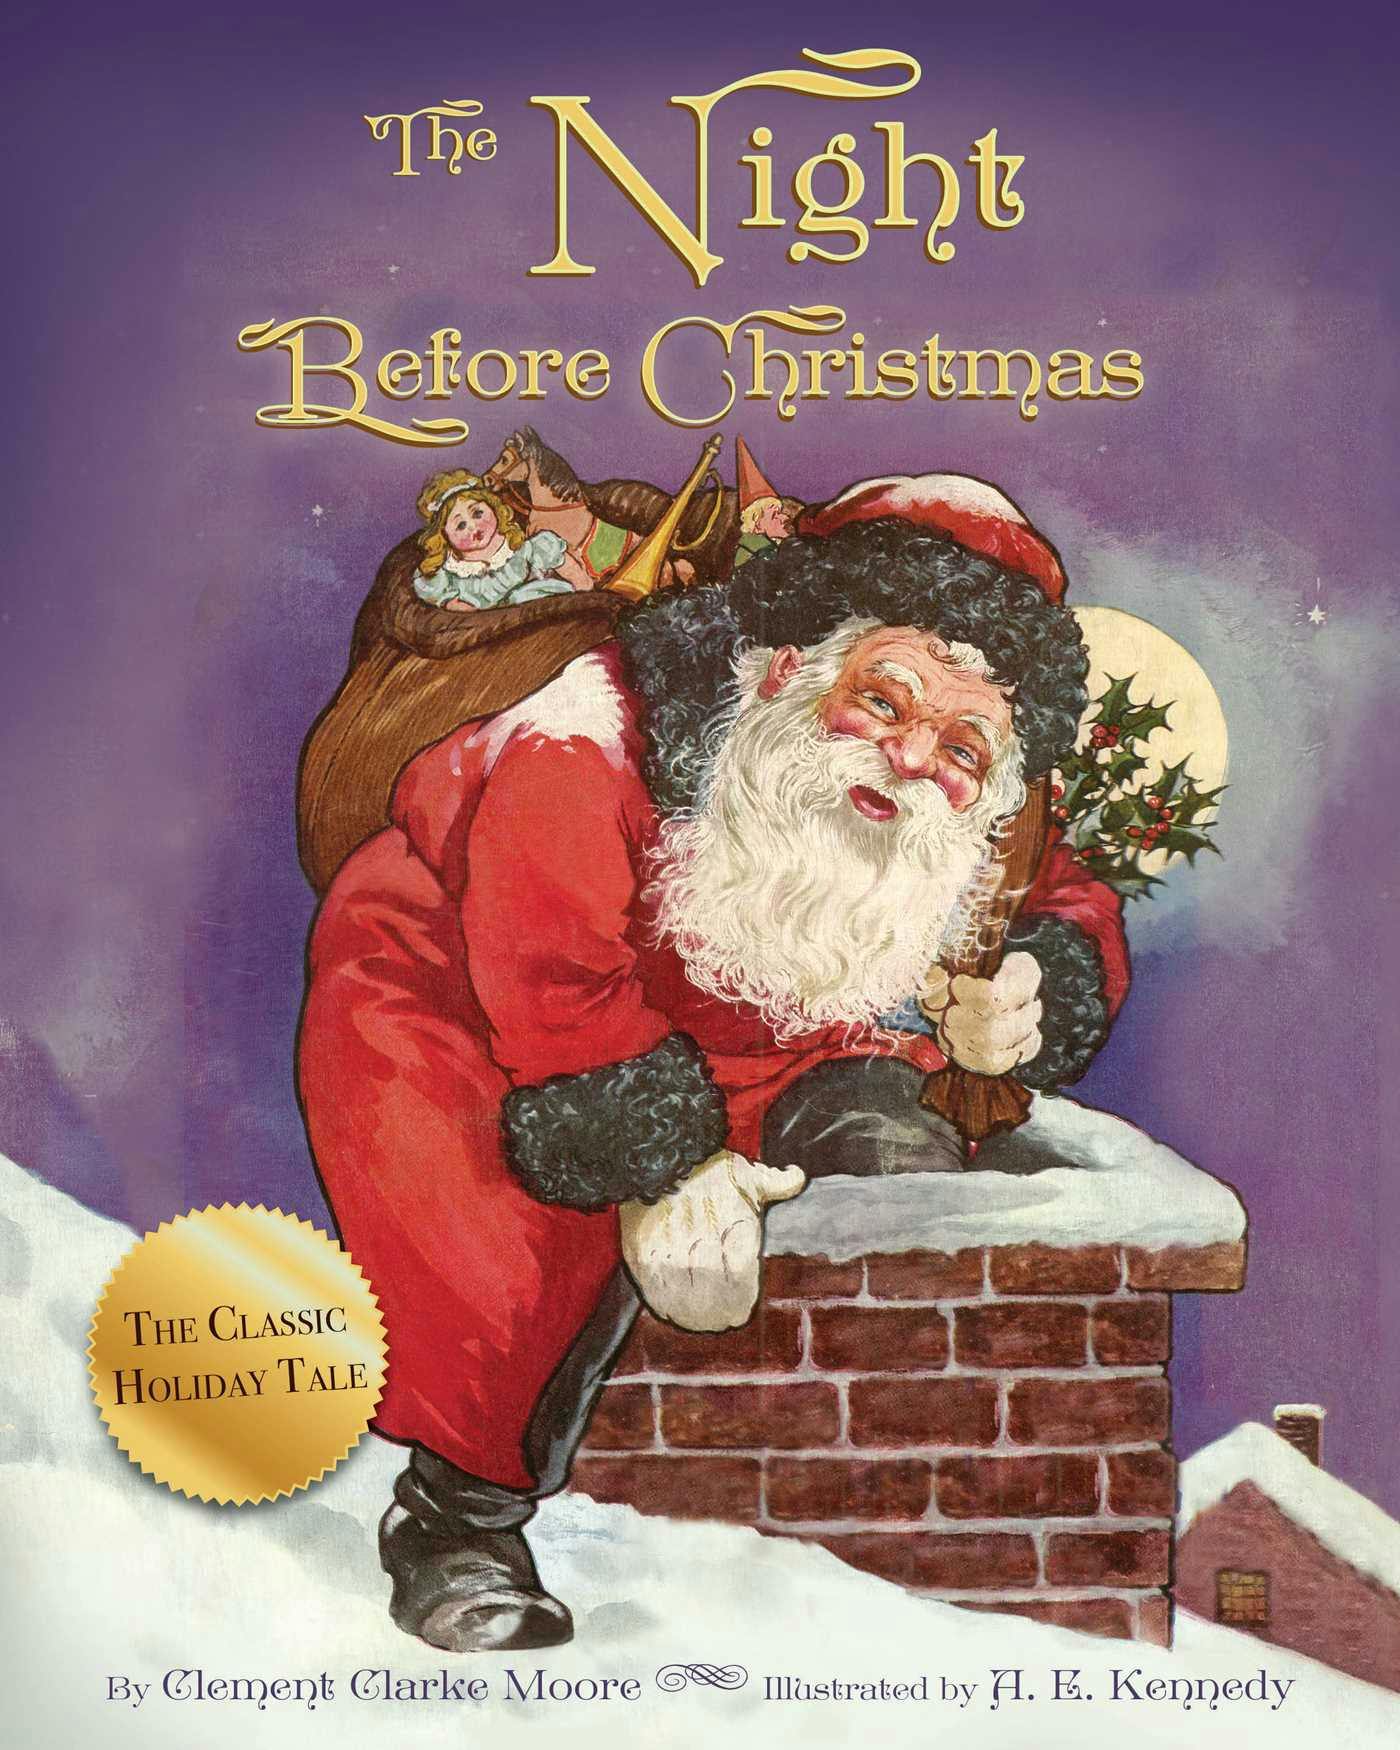 The Night Before Christmas - Clement Clarke Moore, A. E. Kennedy